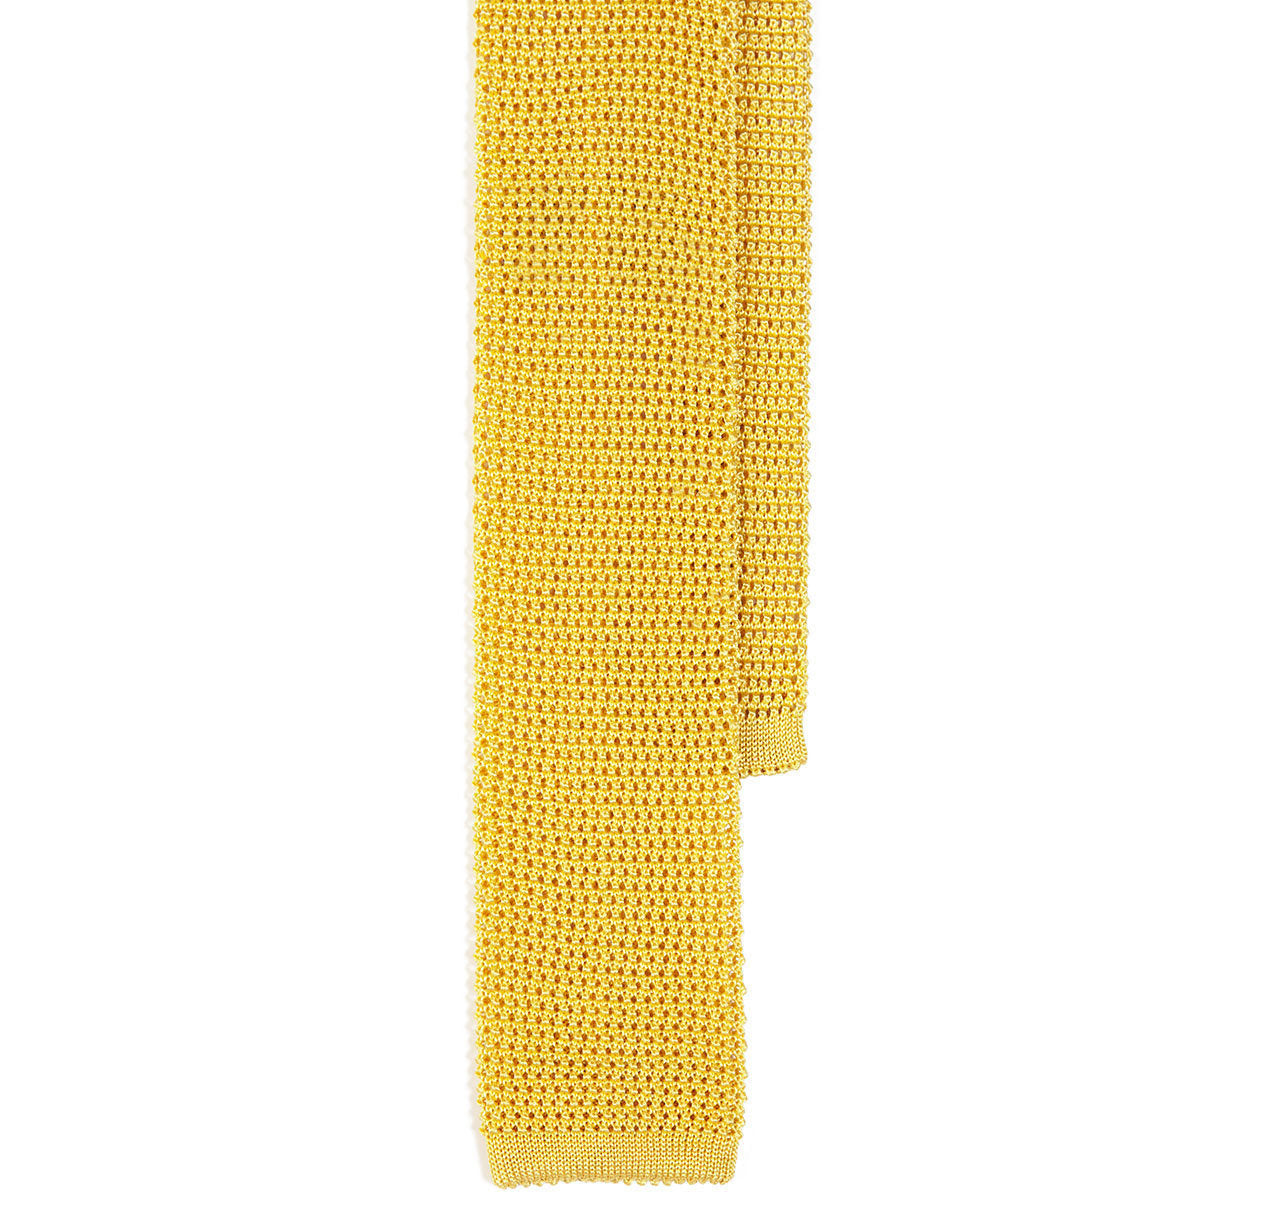 Sir Jack's Classic Knit Silk Tie in Monte Carlo Yellow